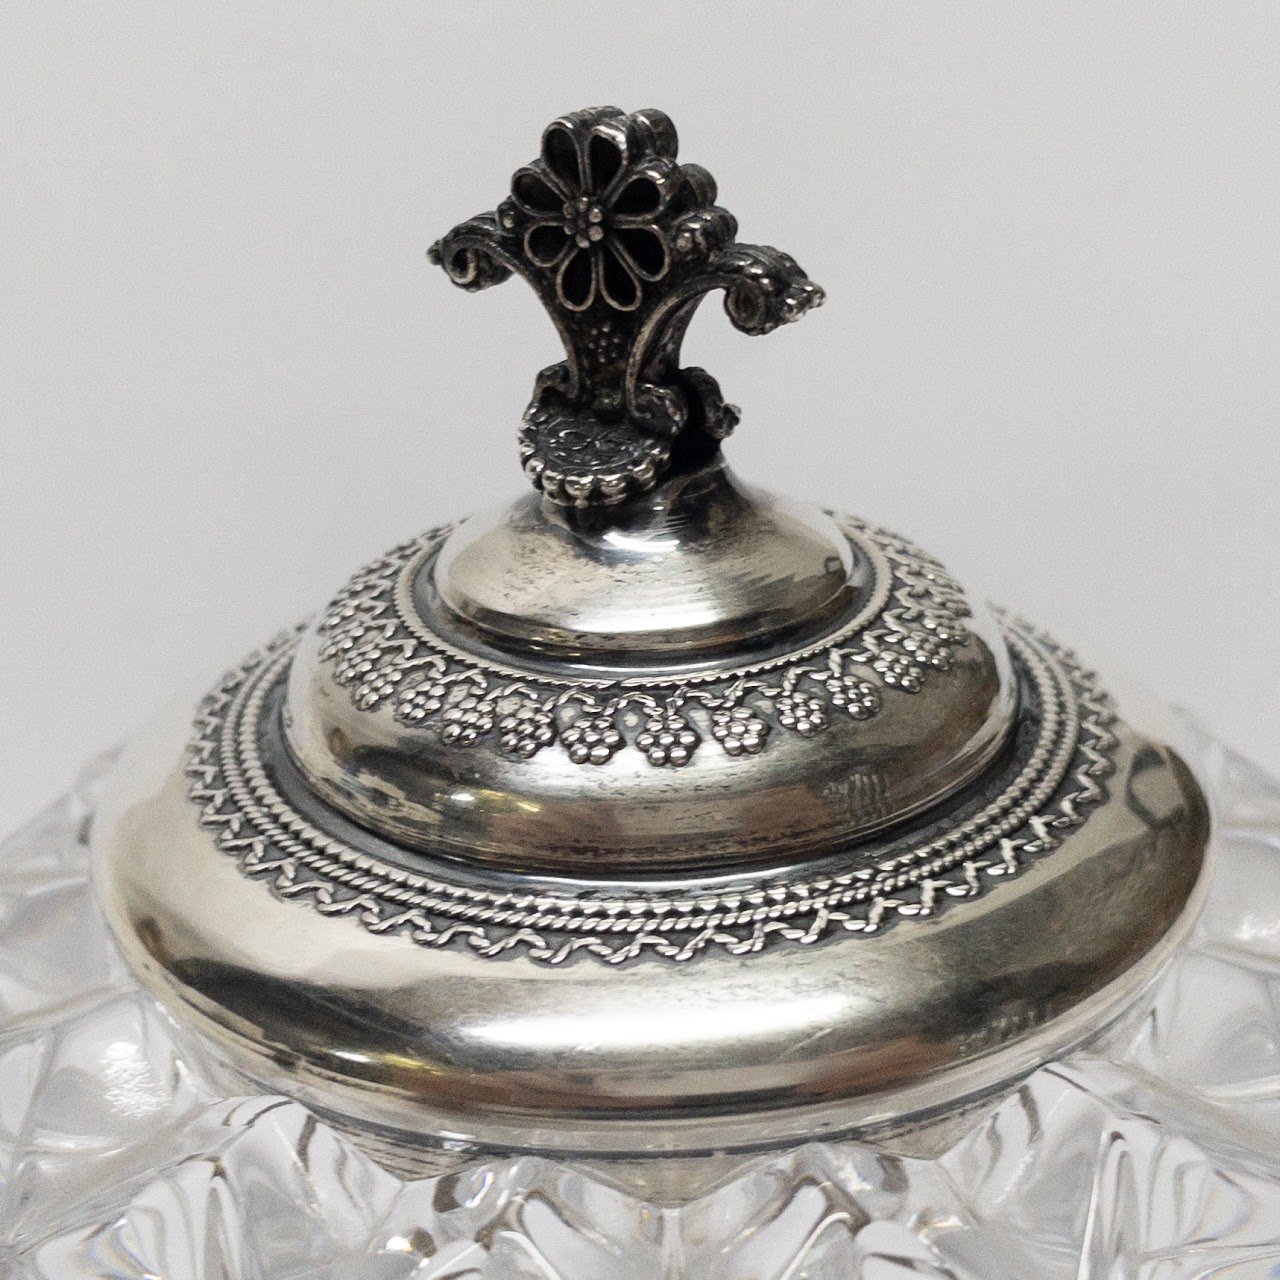 Sterling Silver and Crystal Lidded Ben Zion Candle Holder